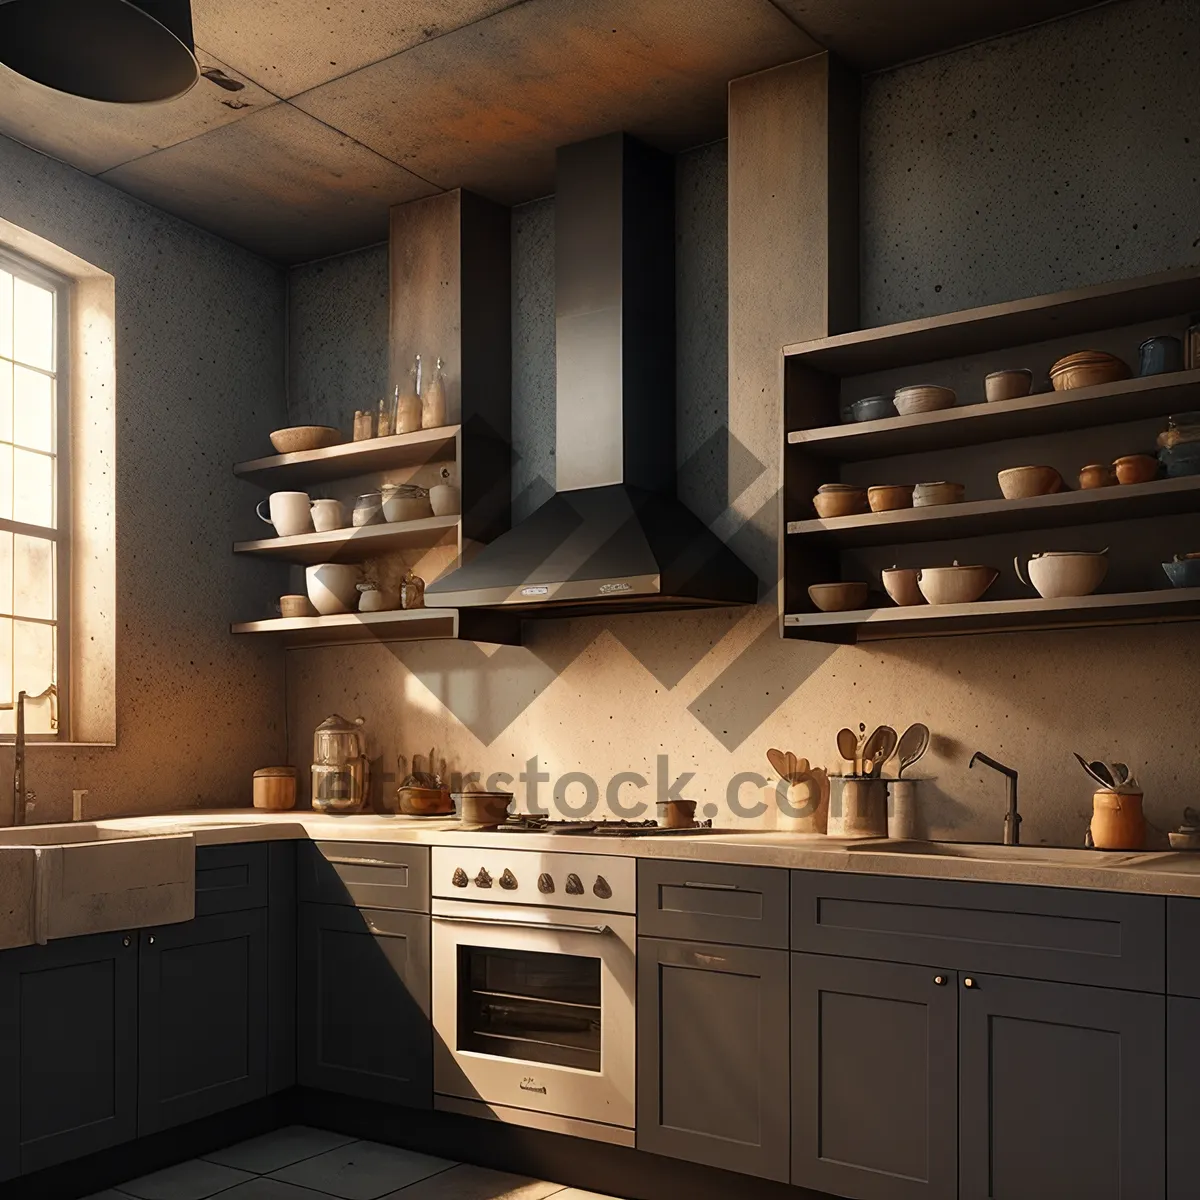 Picture of Modern Kitchen Interior with Stylish Appliances and Wood Design